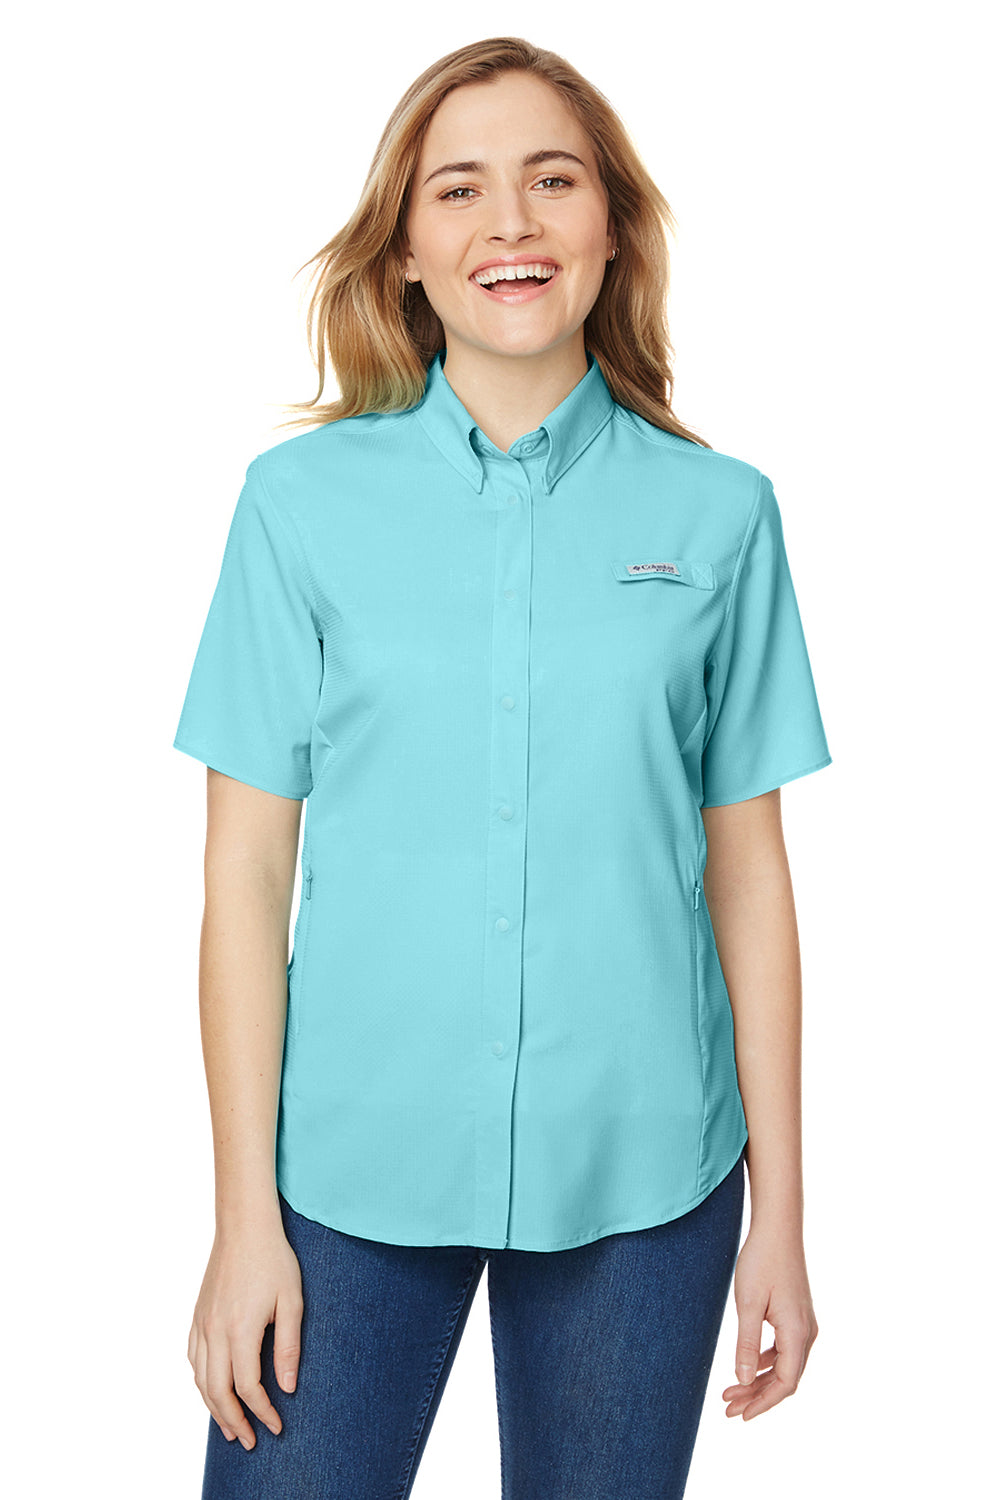 Columbia 7277 Womens Tamiami II Moisture Wicking Short Sleeve Button Down Shirt w/ Double Pockets Clear Blue Front